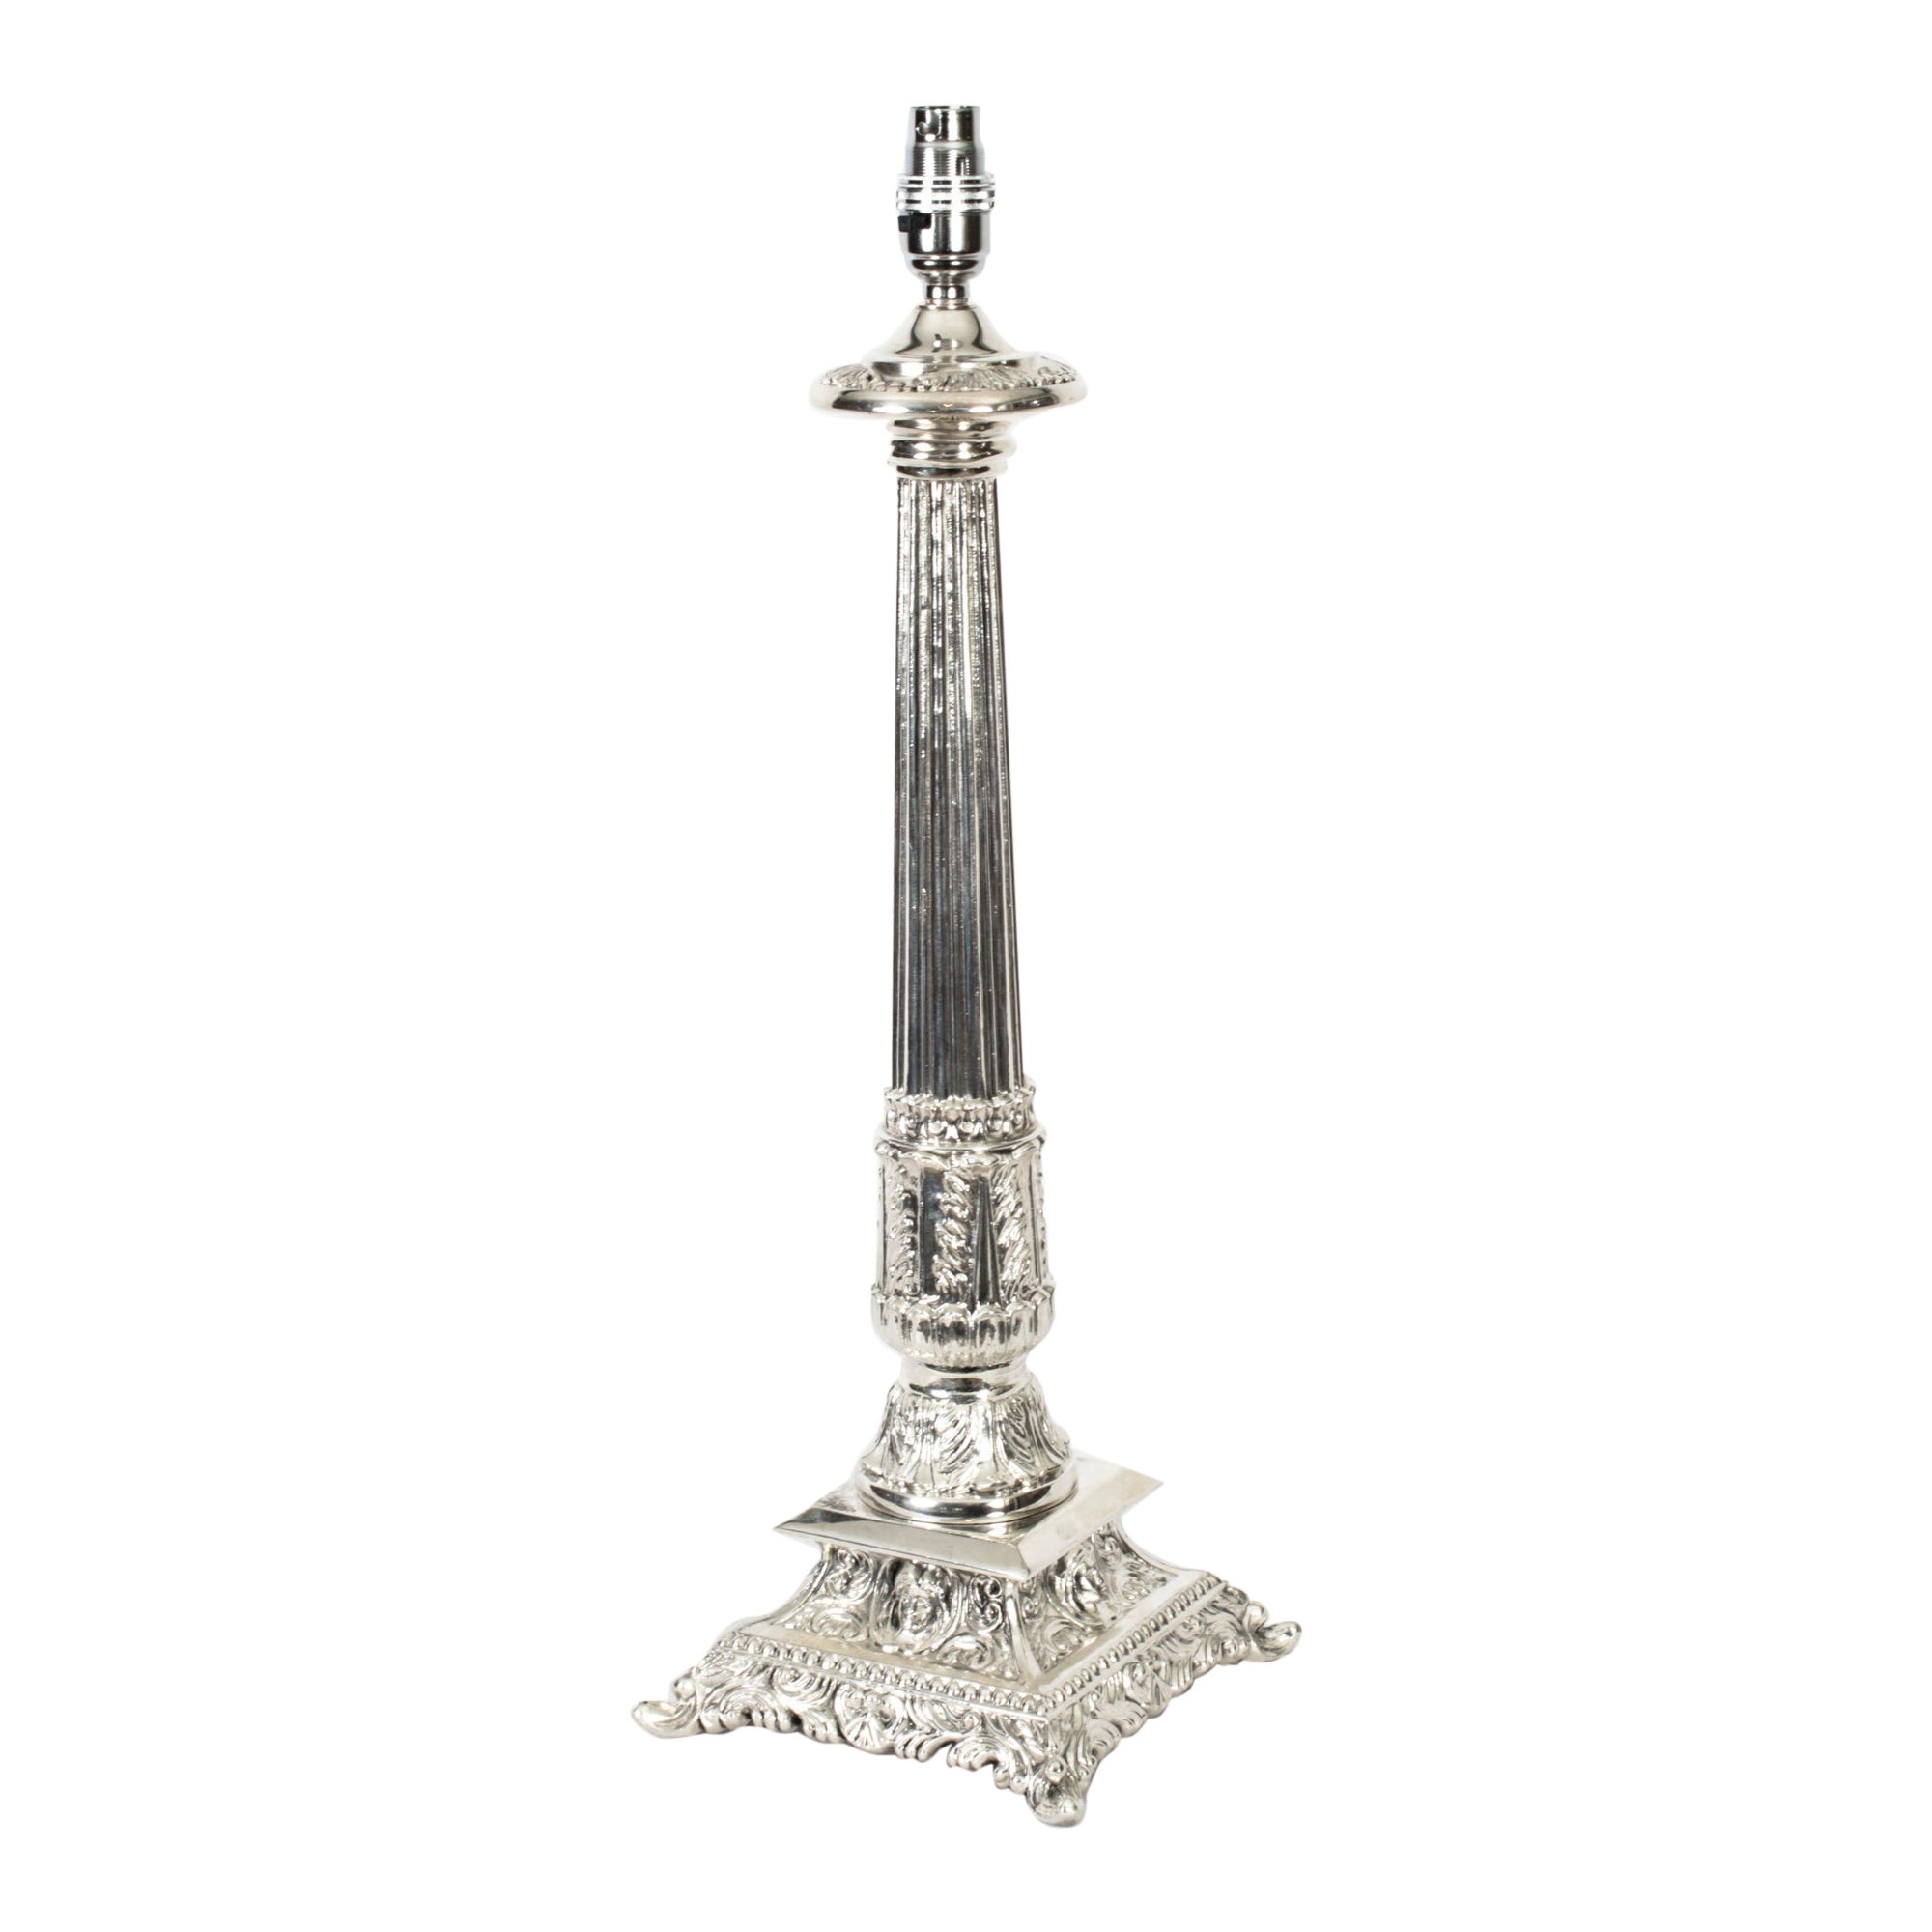 Antique Victorian Silver Plated Doric Column Table Lamp, 19th Century